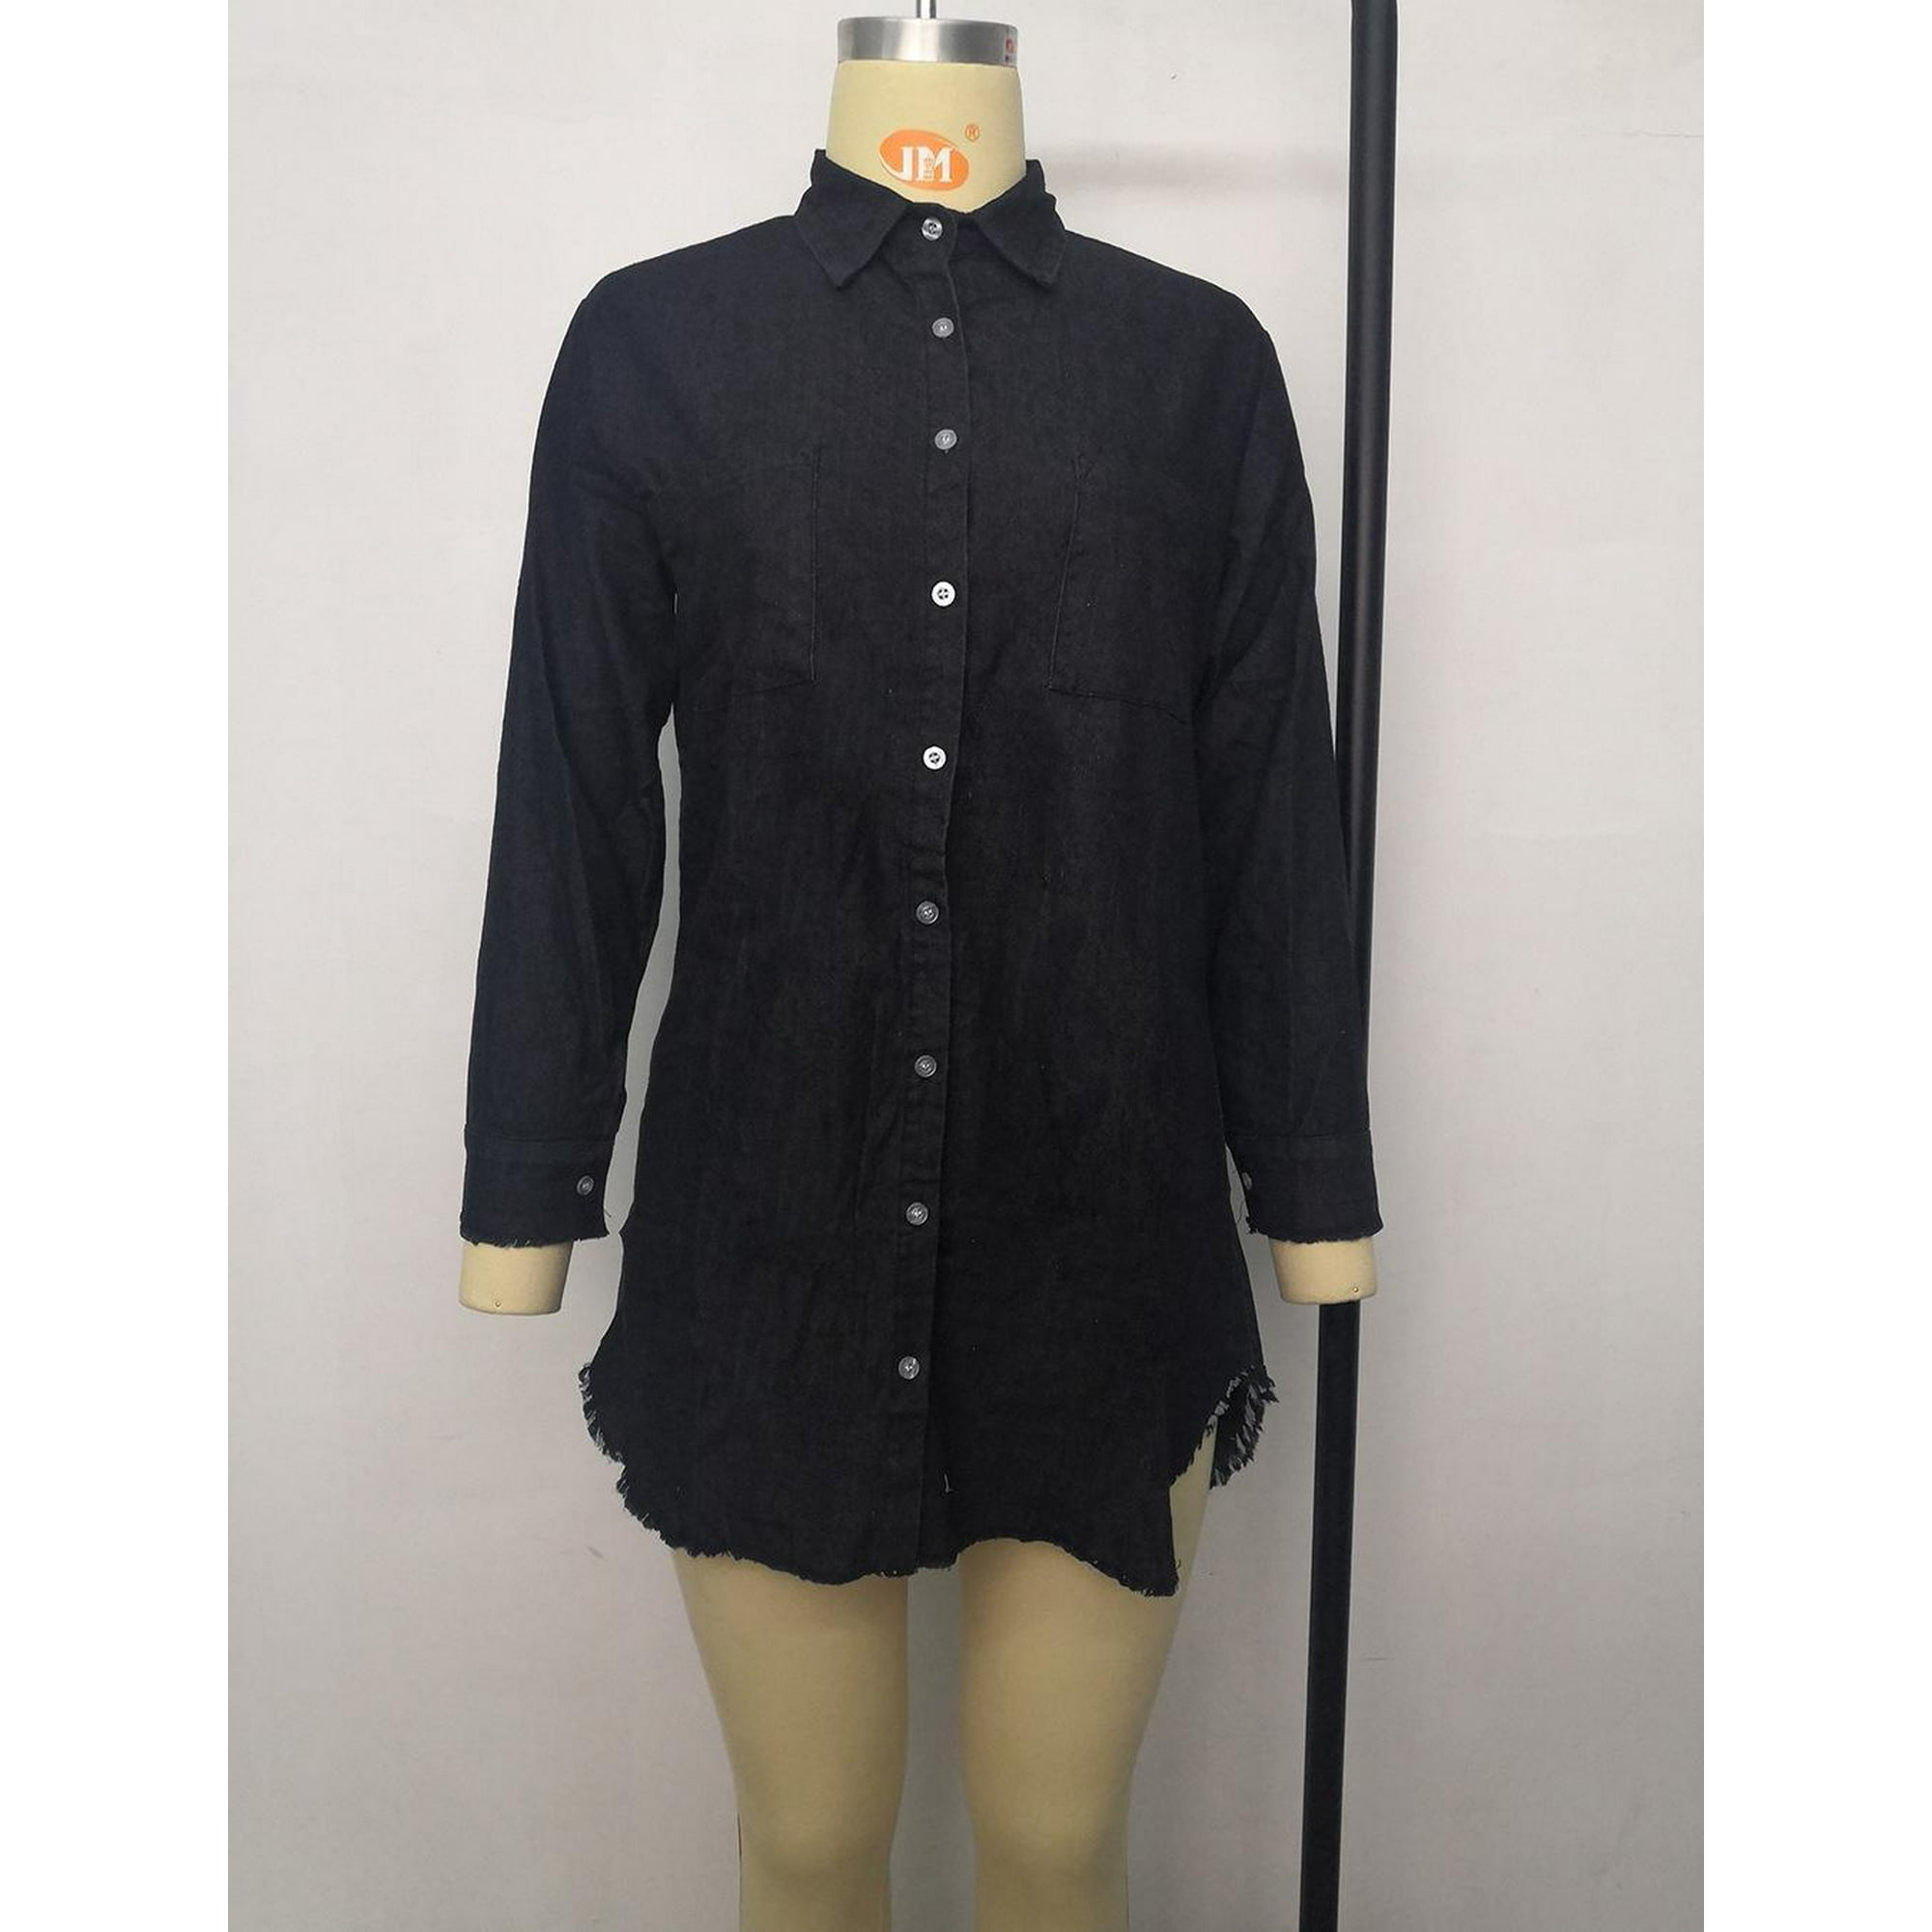 Black Denim Jacket with Black Crew-neck T-shirt Outfits For Women